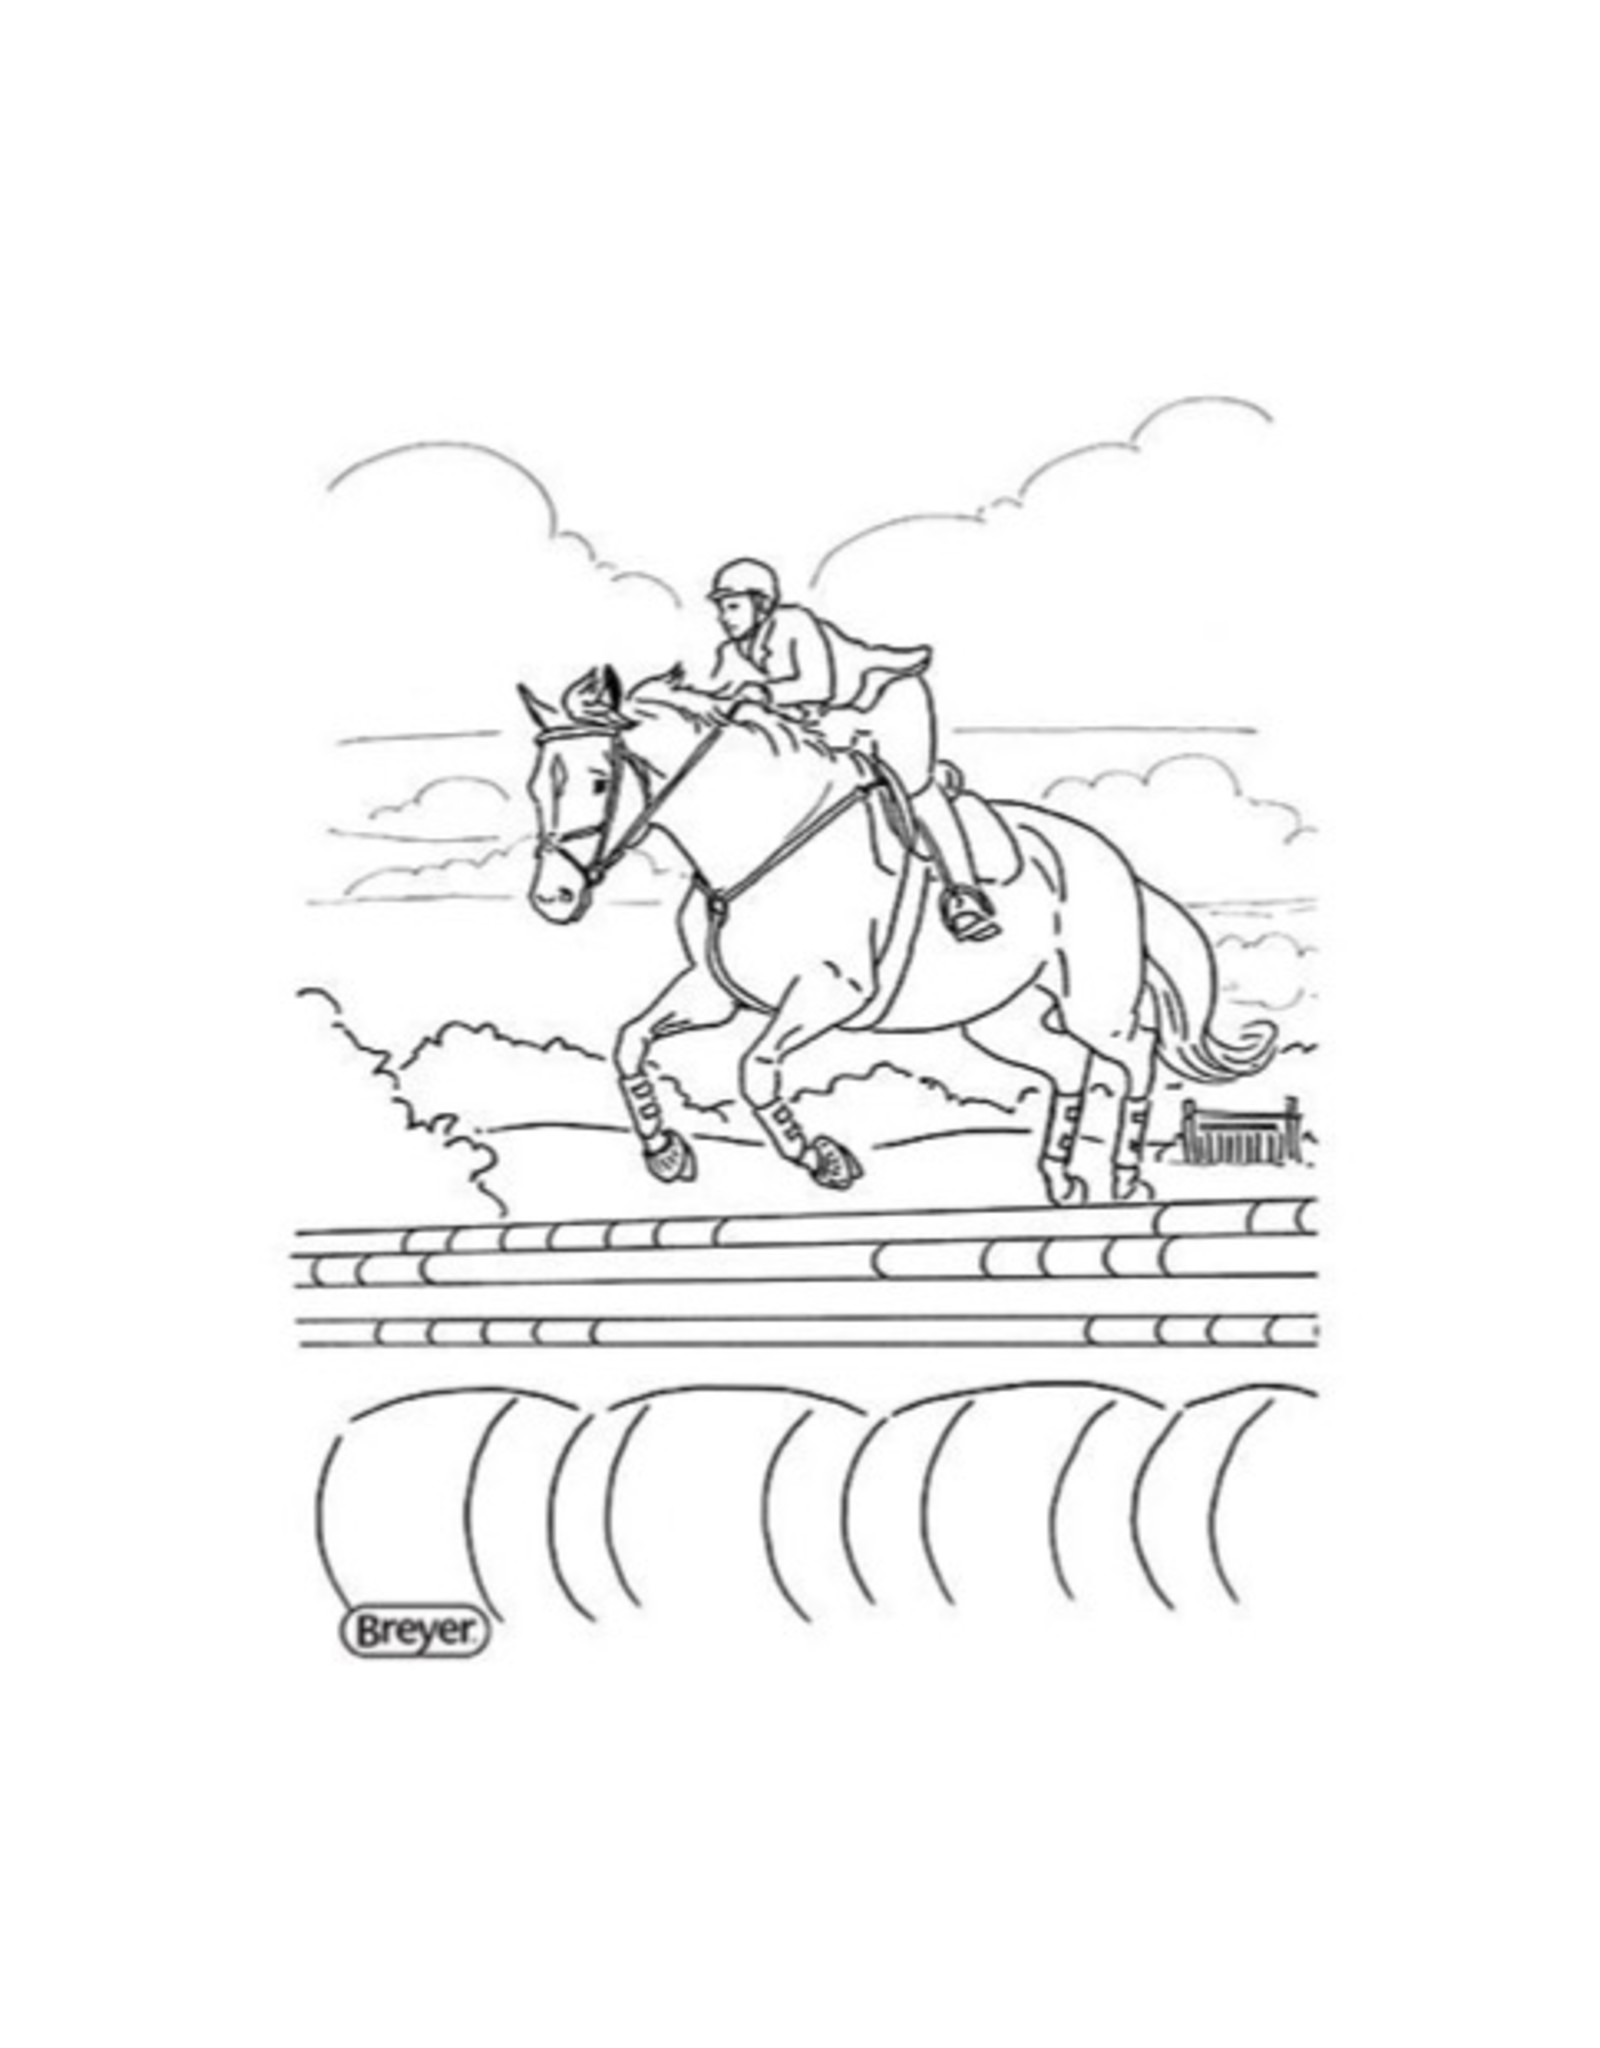 Breyer H is for Horse Activity Book